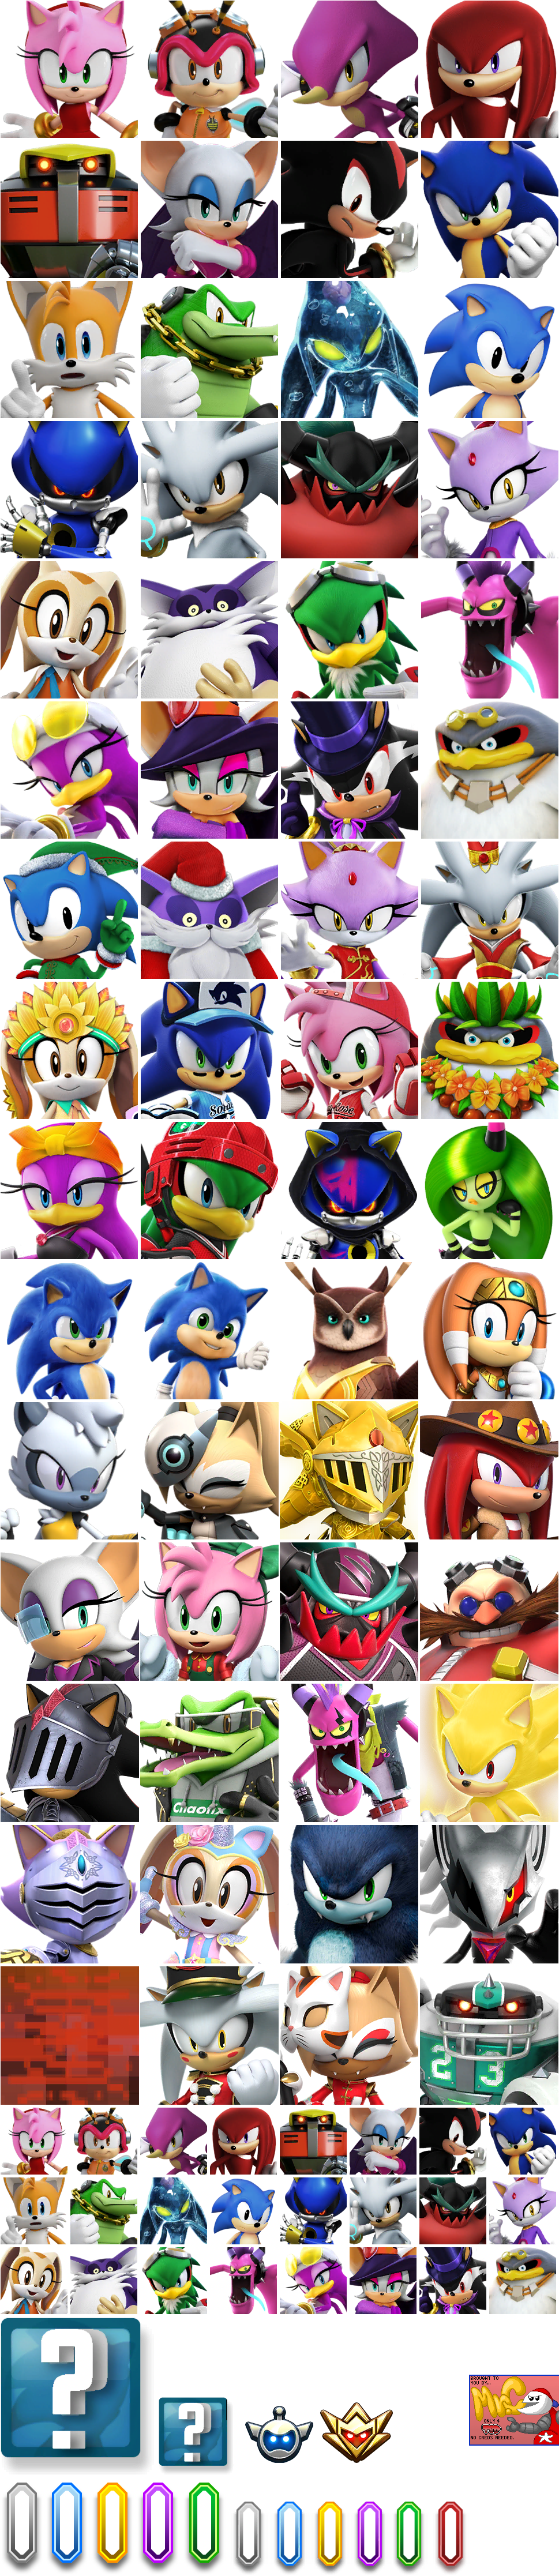 Sonic Forces: Speed Battle - Character Icons (Cards)